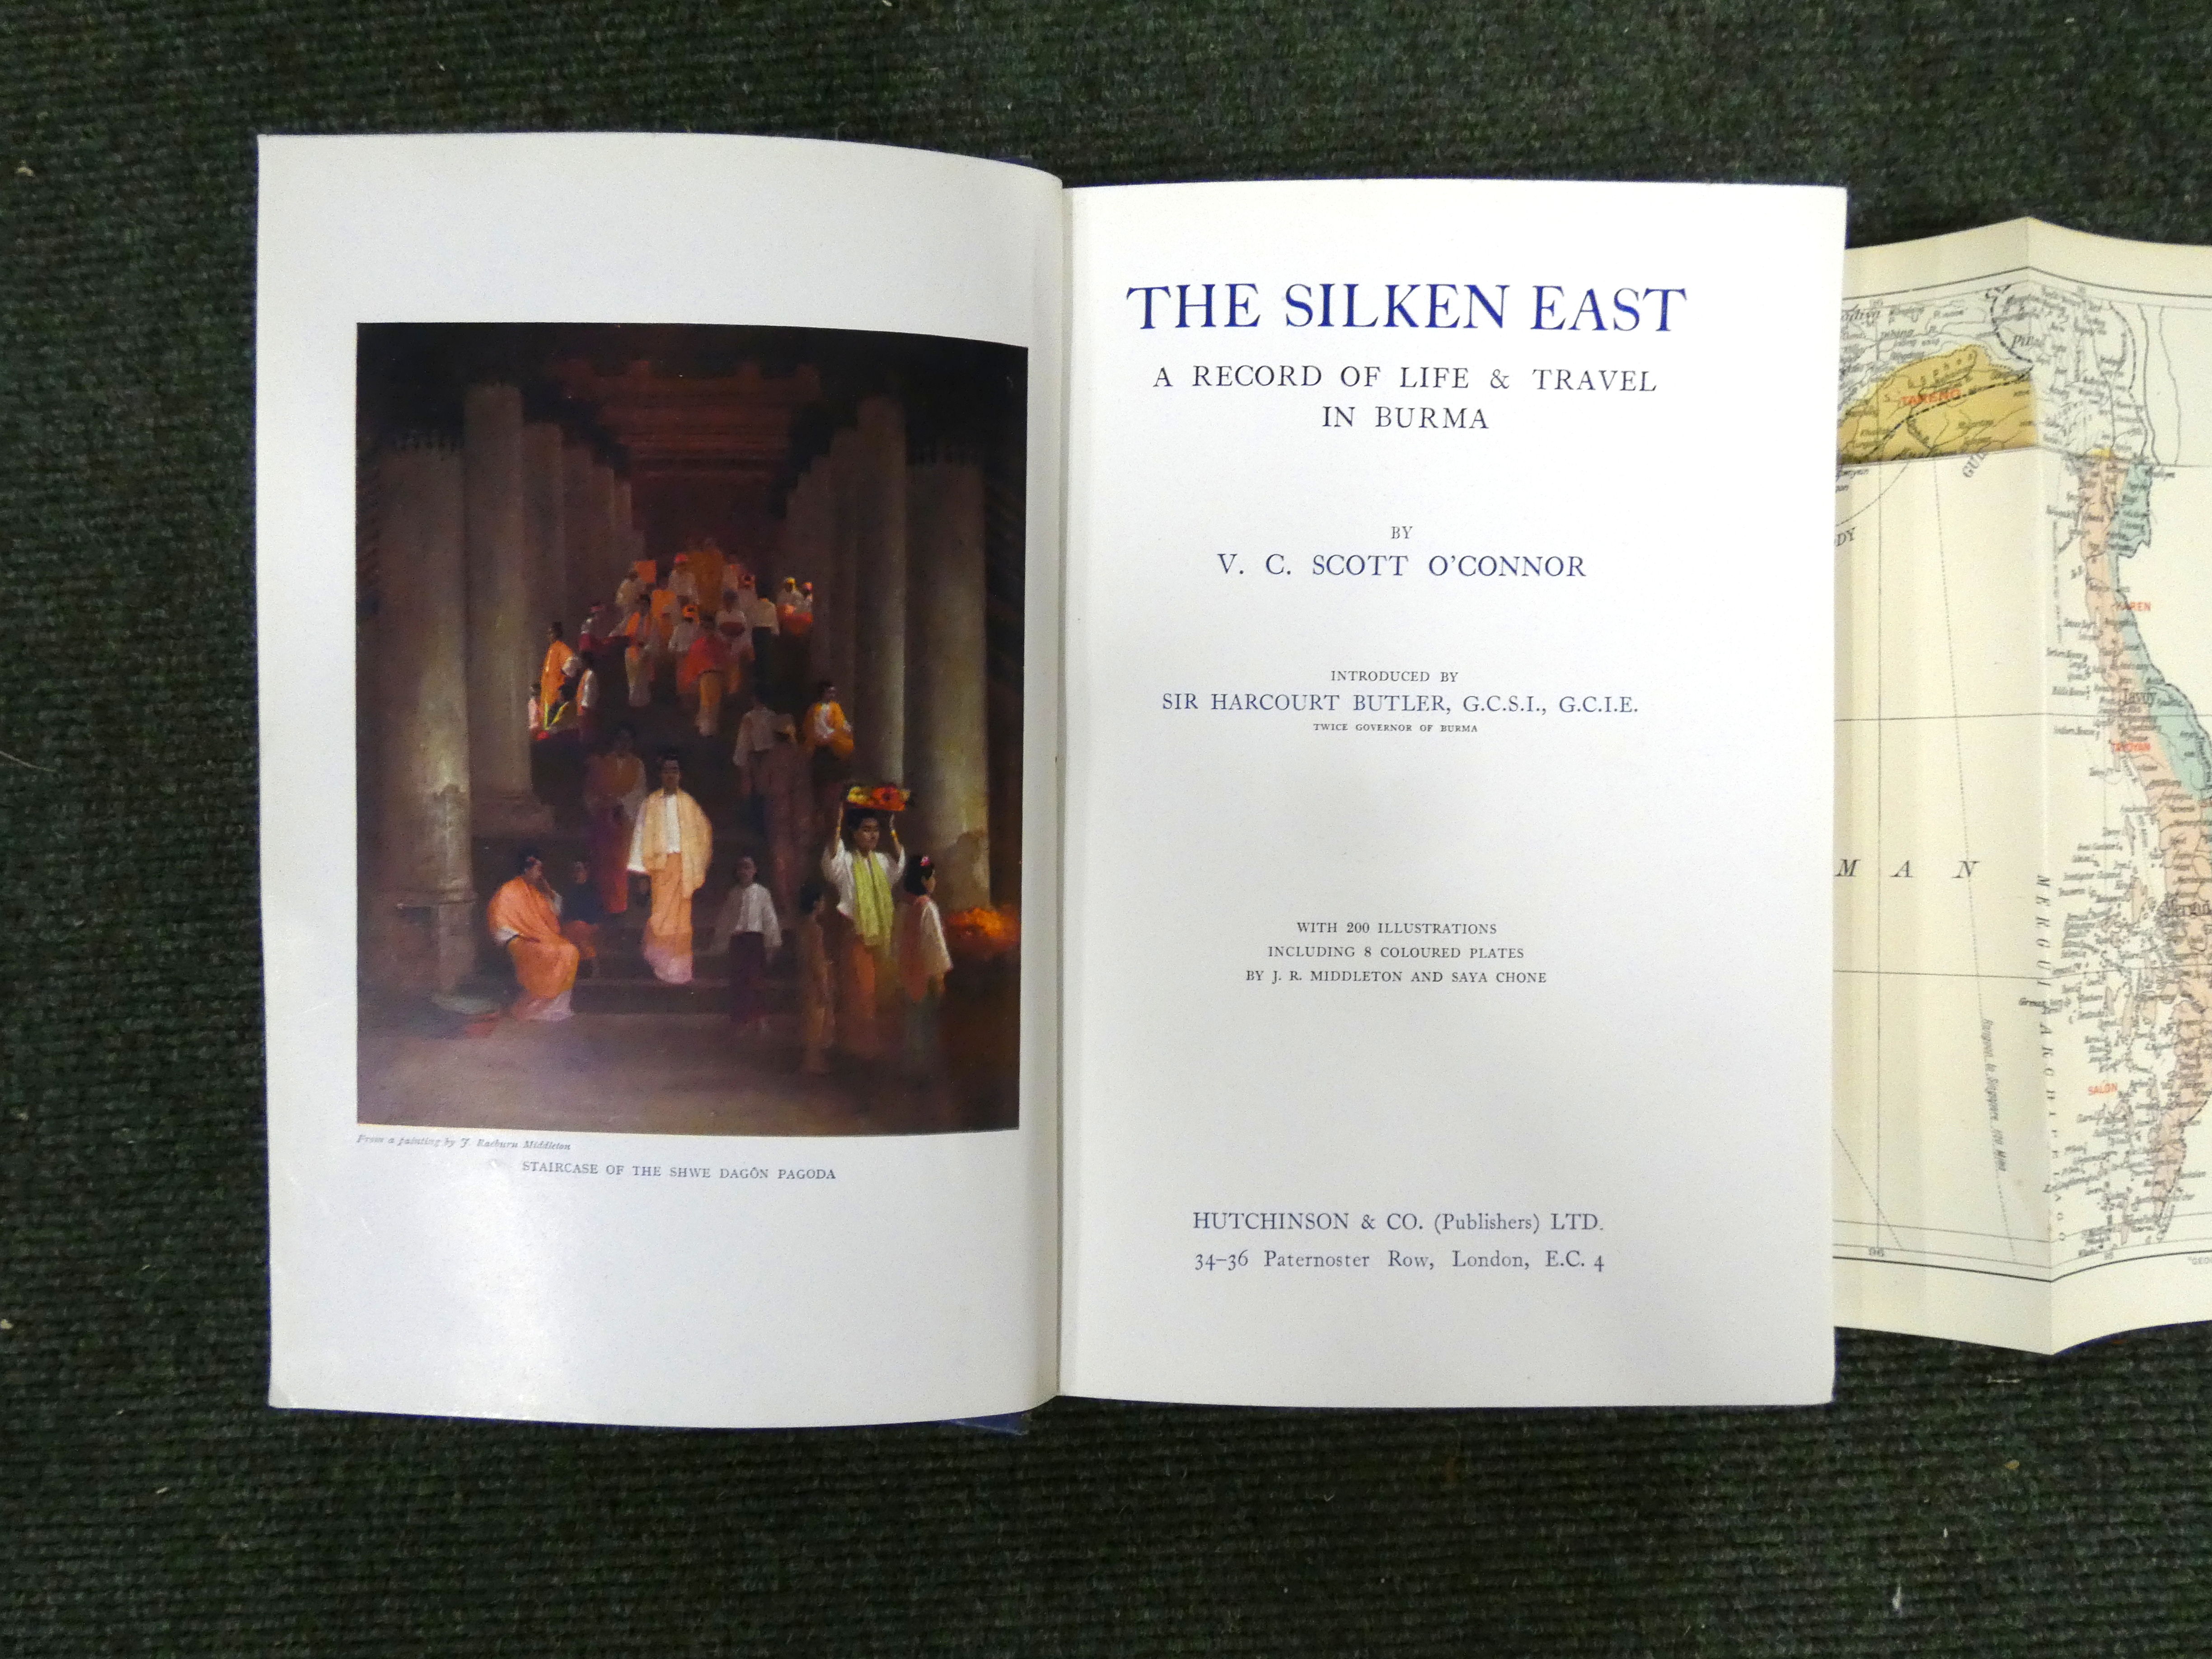 SCOTT O'CONNOR V. C.  The Silken East, A Record of Life & Travel in Burma. Col. plates & many - Image 2 of 3